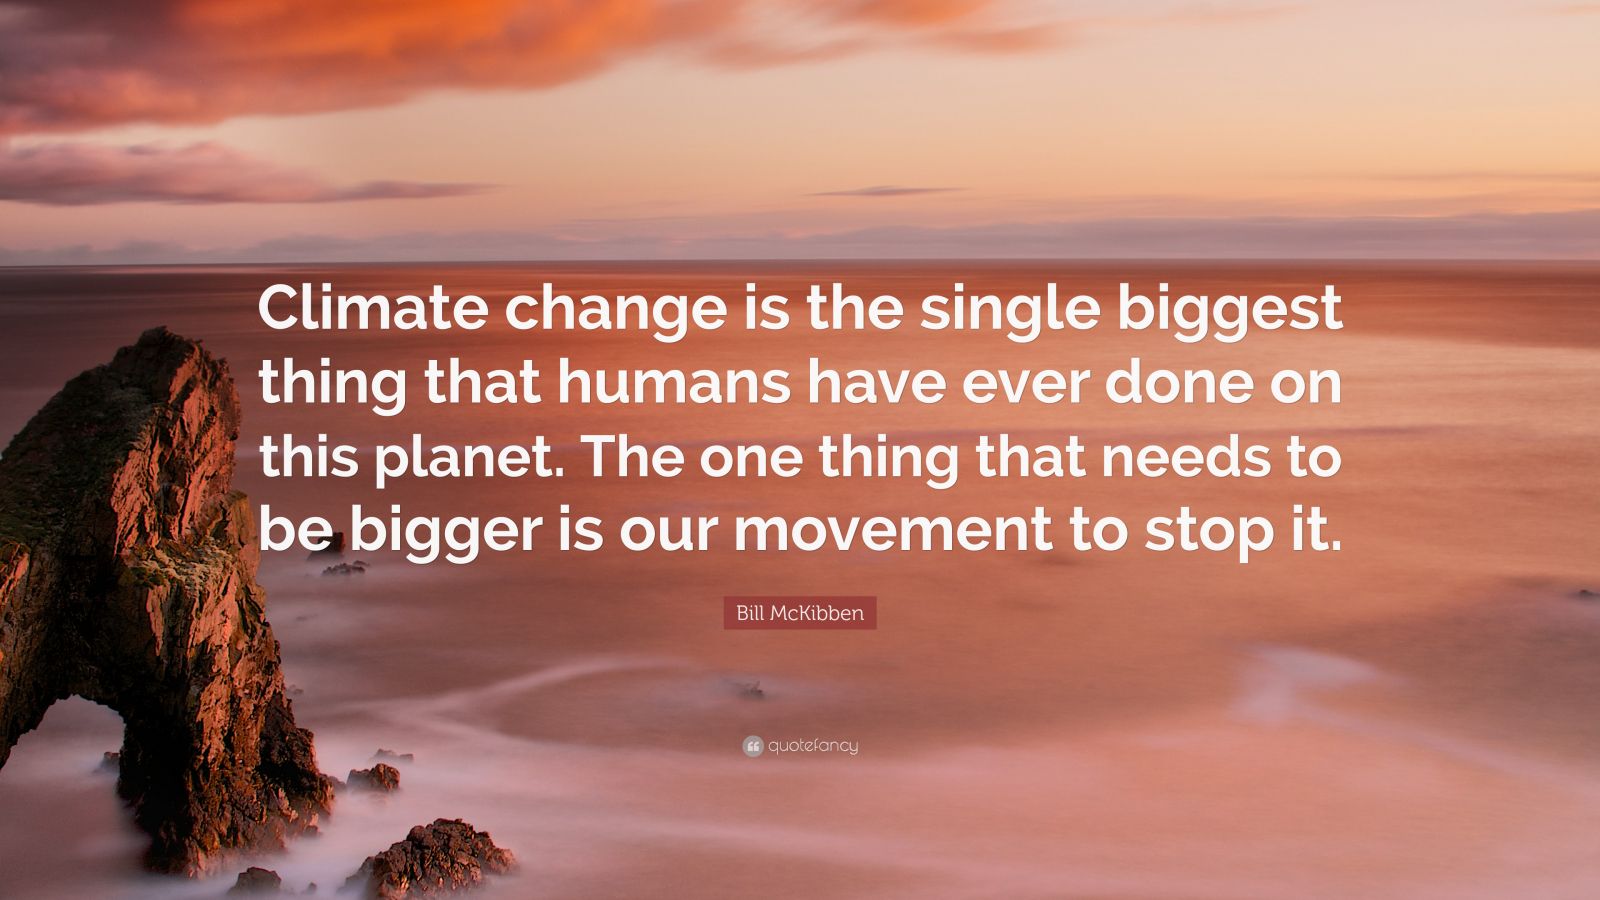 Bill McKibben Quote: “Climate change is the single biggest thing that